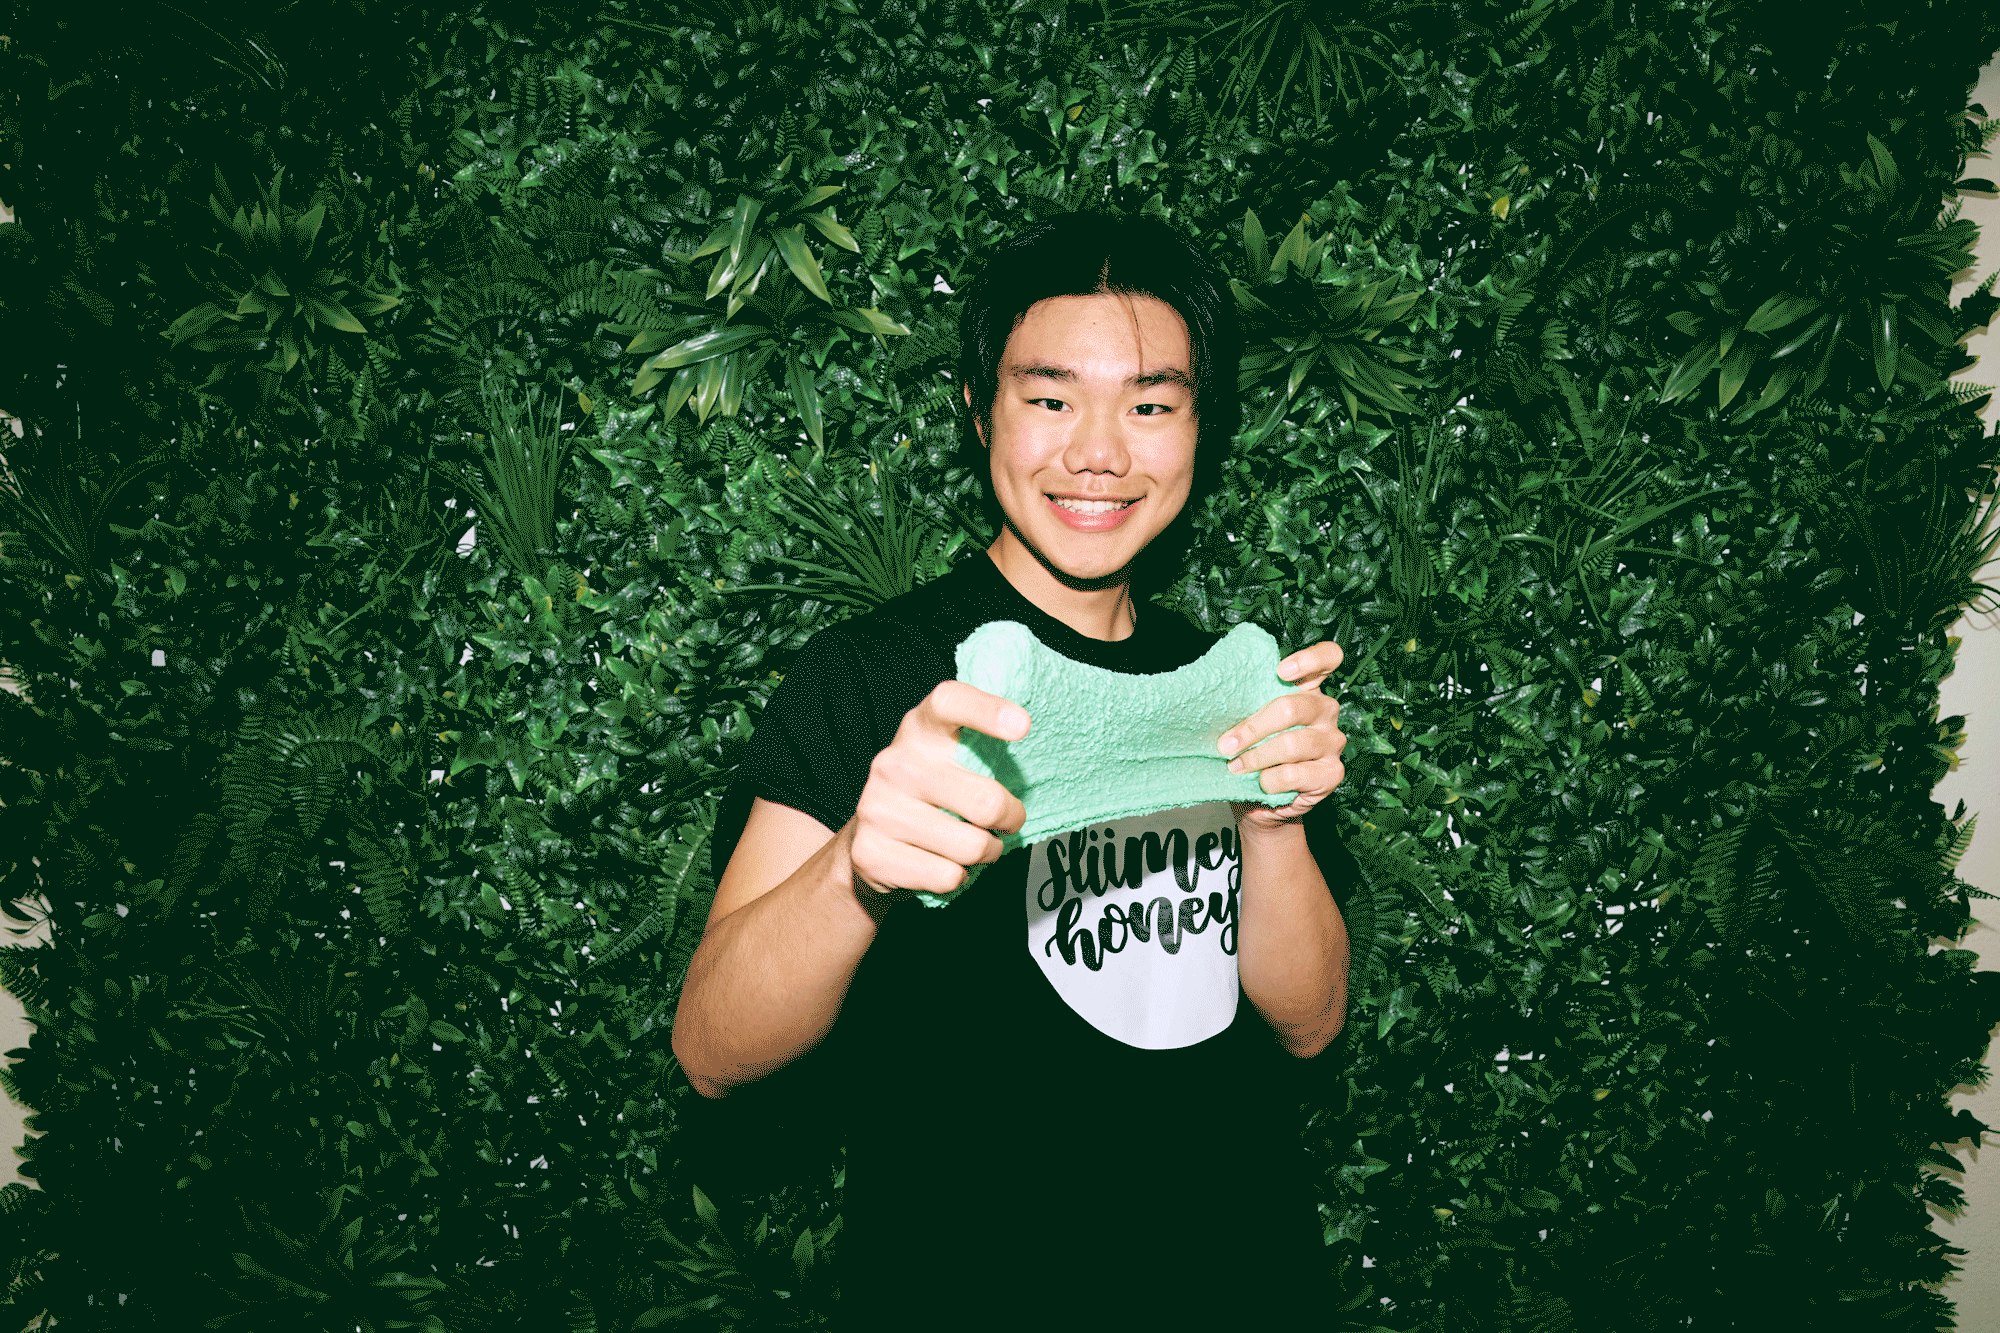 A young man of Asian descent, Mark Lin, plays with a slimy substance he invented, smiling